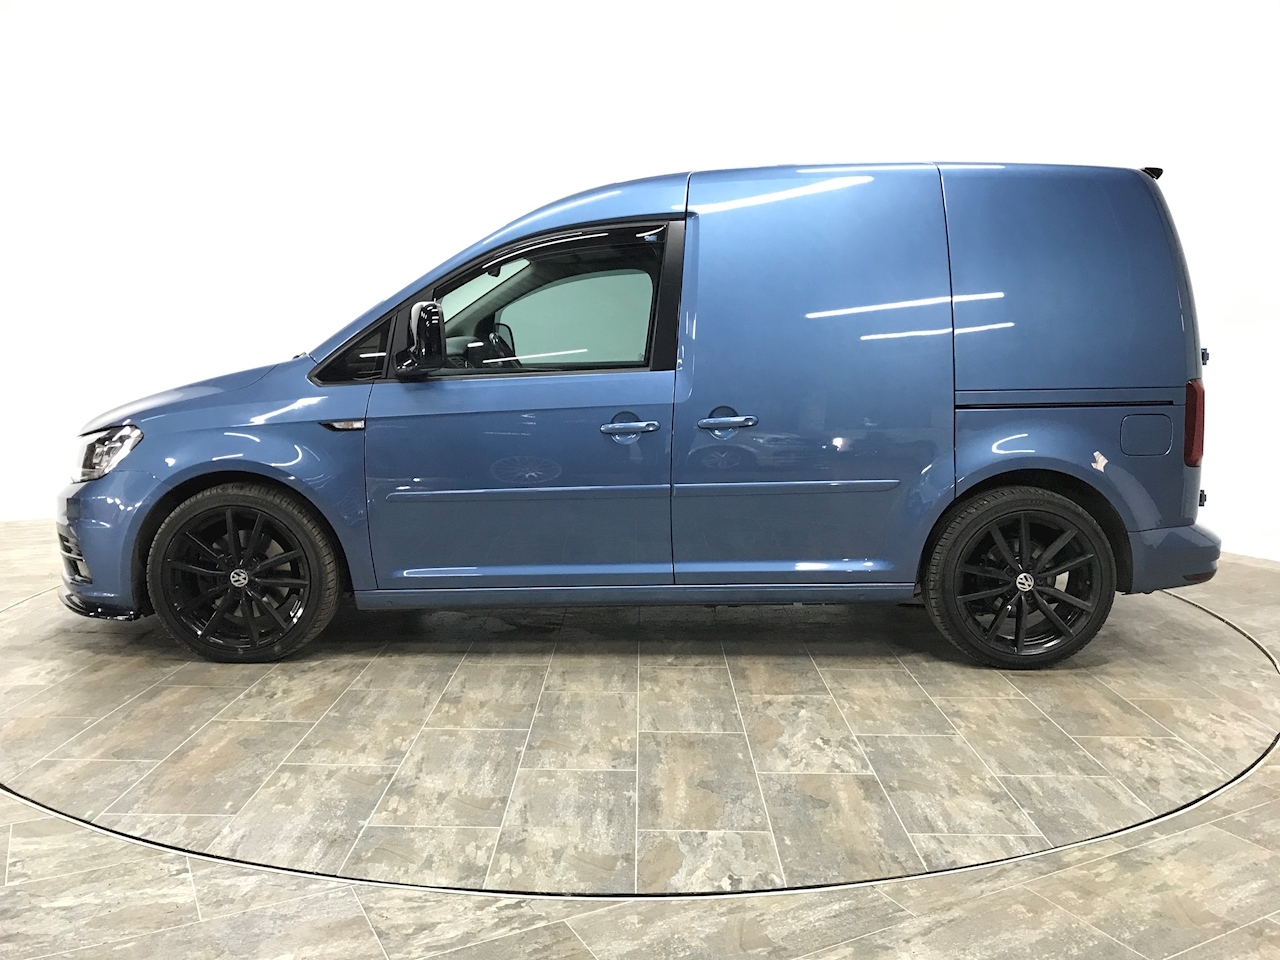 vw caddy for sale dorset